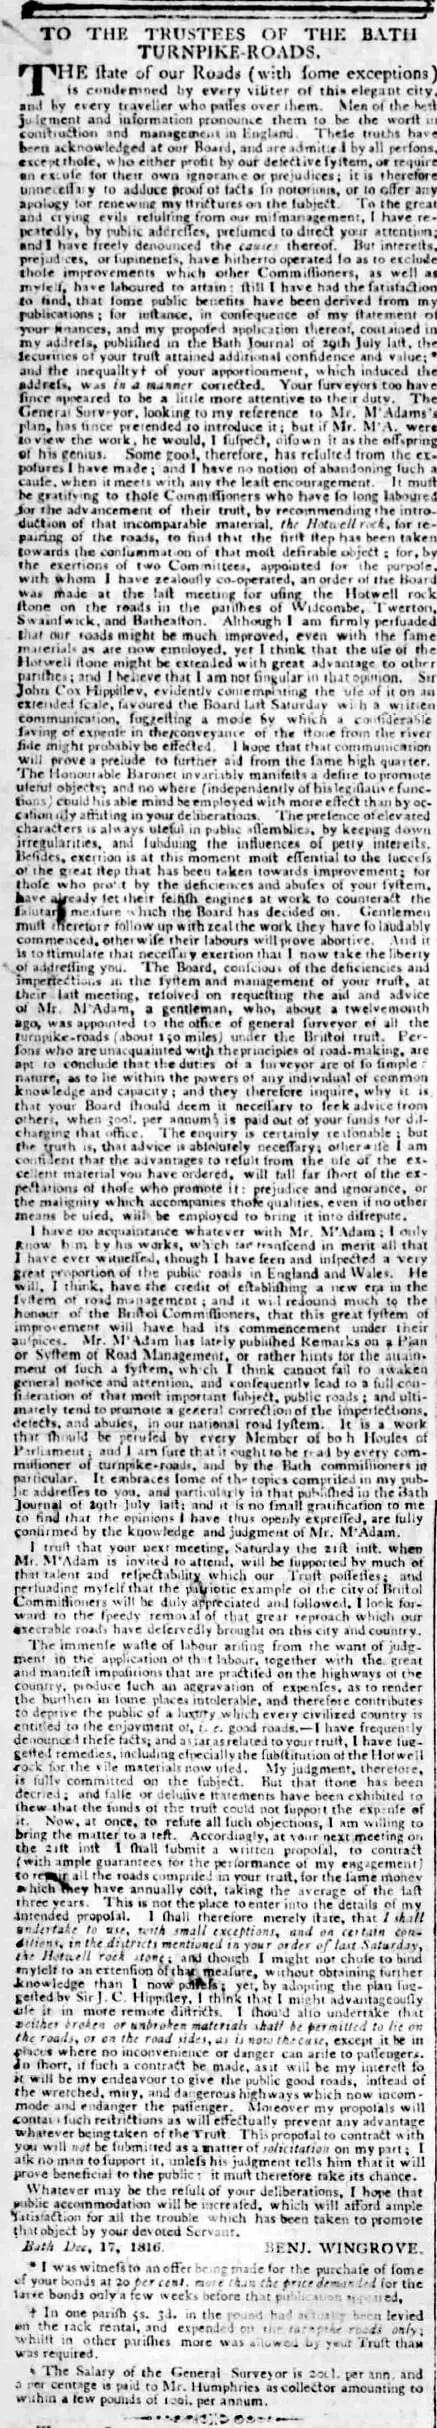 benjamin wingrove letter to turnpike trustees bath chronicle and weekly gazette thursday 19 december 1816